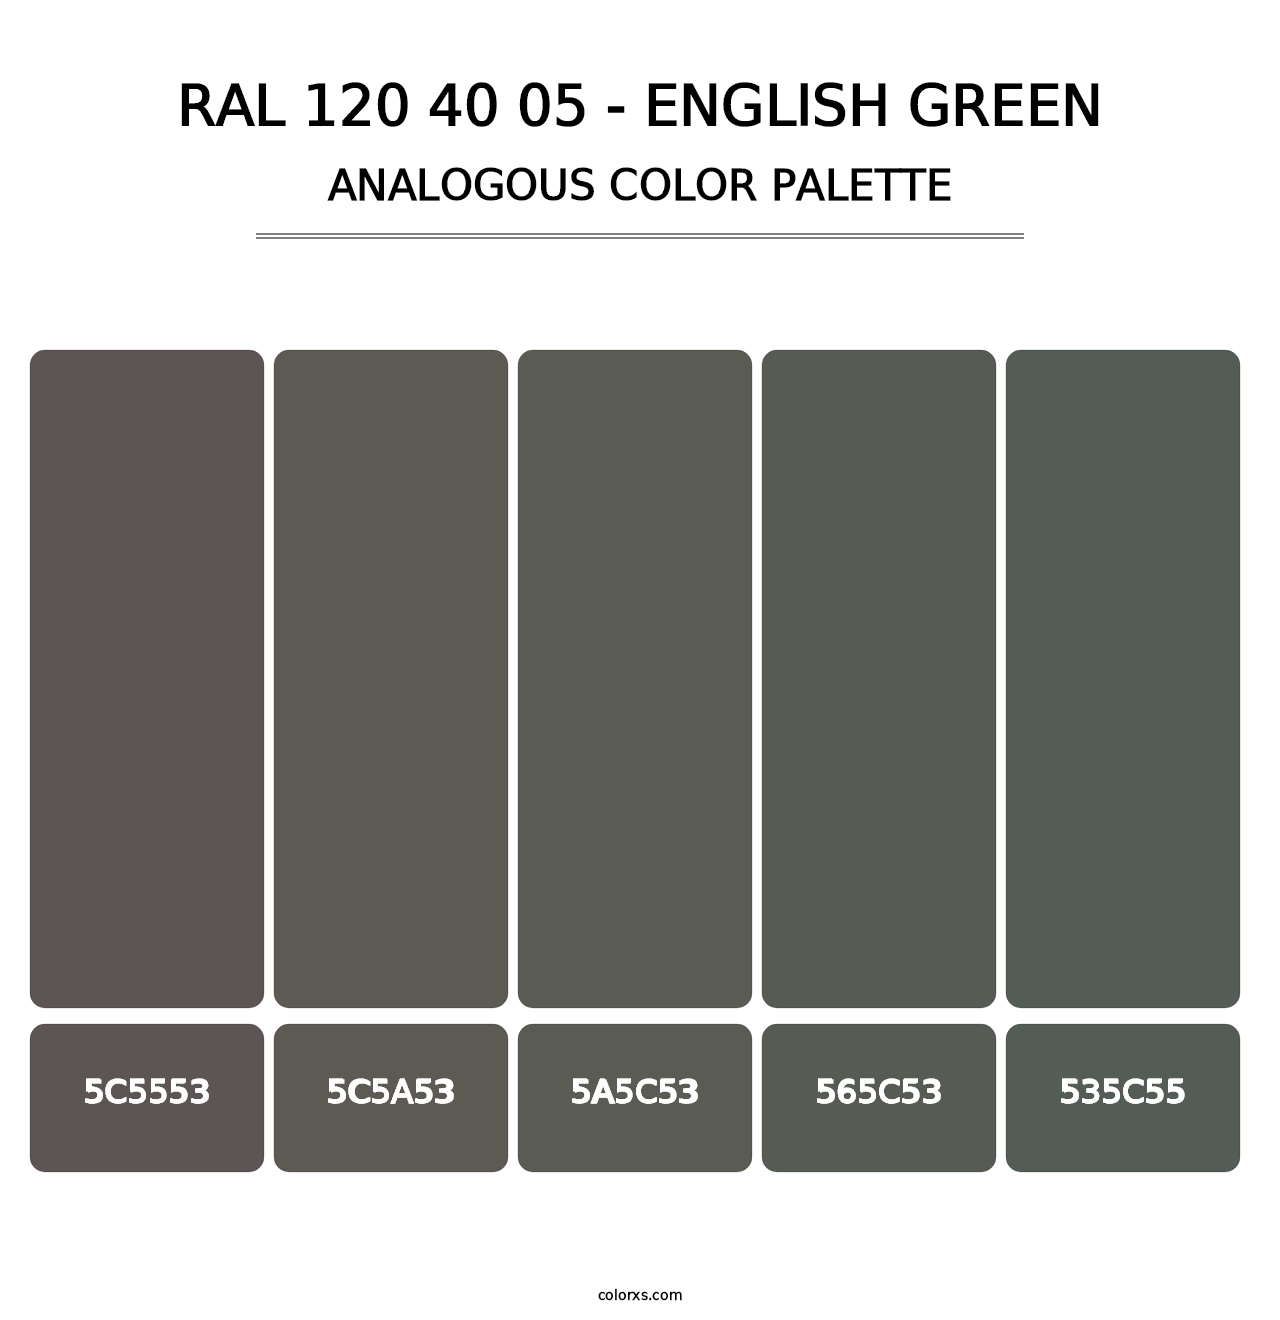 RAL 120 40 05 - English Green - Analogous Color Palette